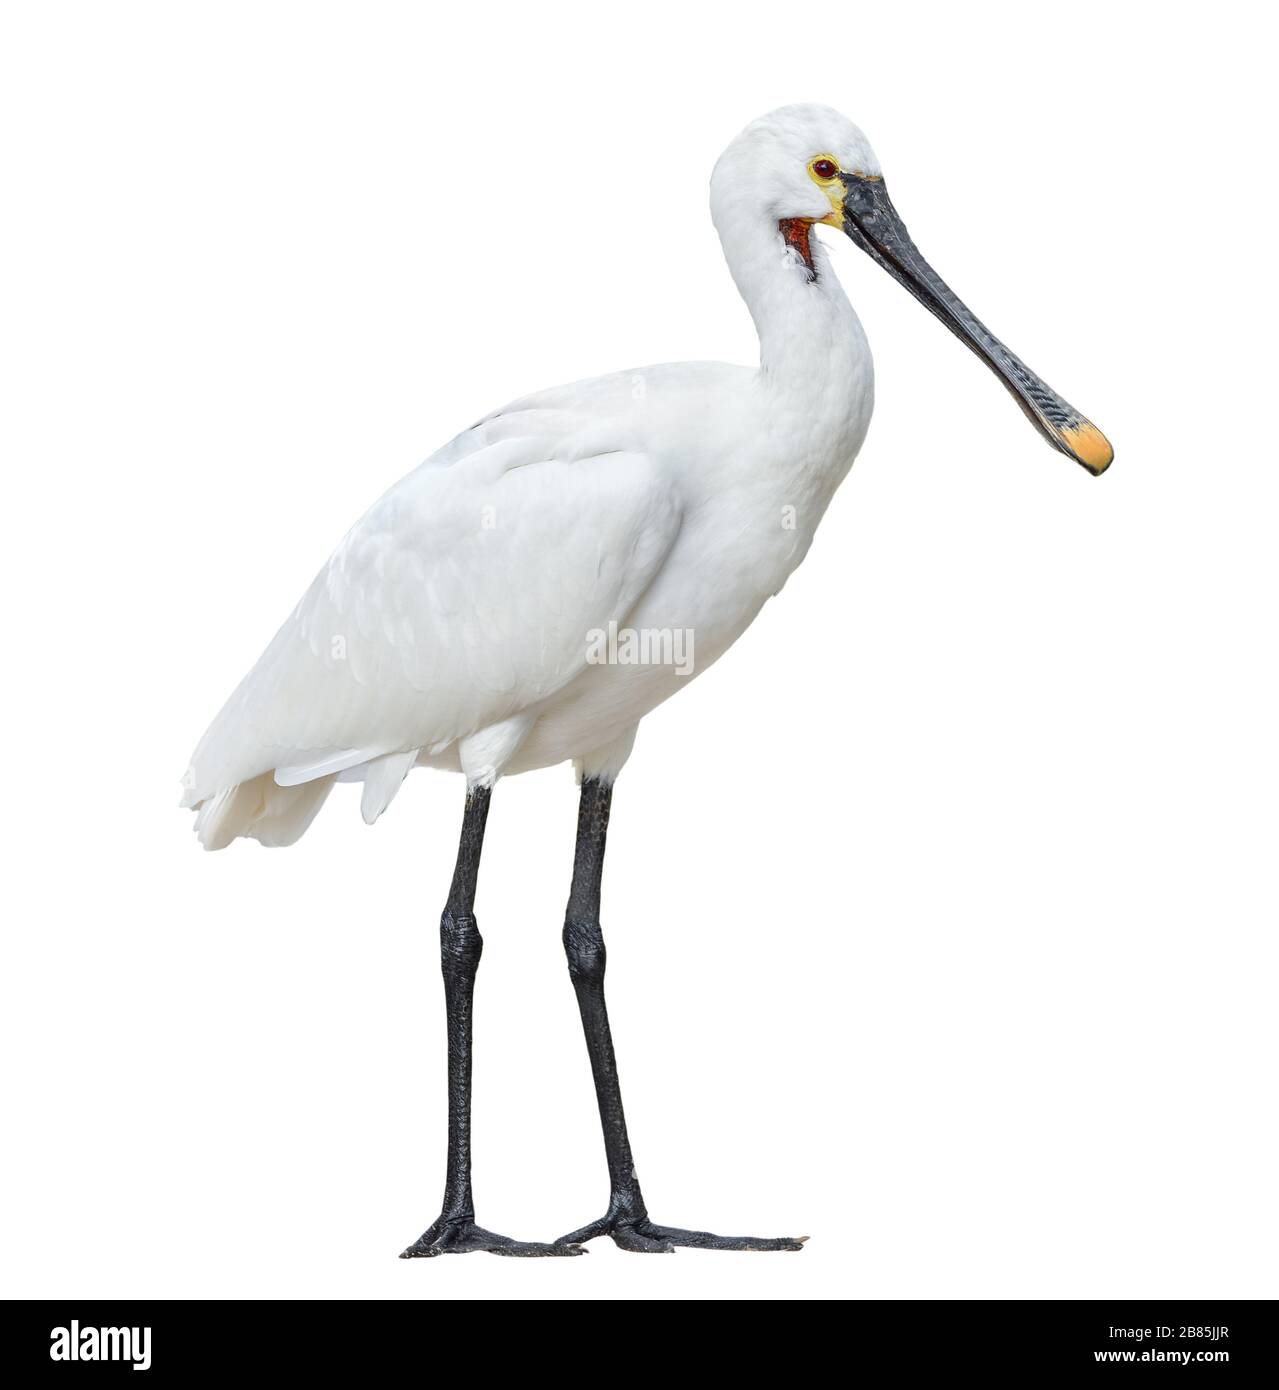 Eurasian spoonbill isolated on white background full length. The Eurasian spoonbill or common spoonbill is a wading bird of the ibis and spoonbill fam Stock Photo